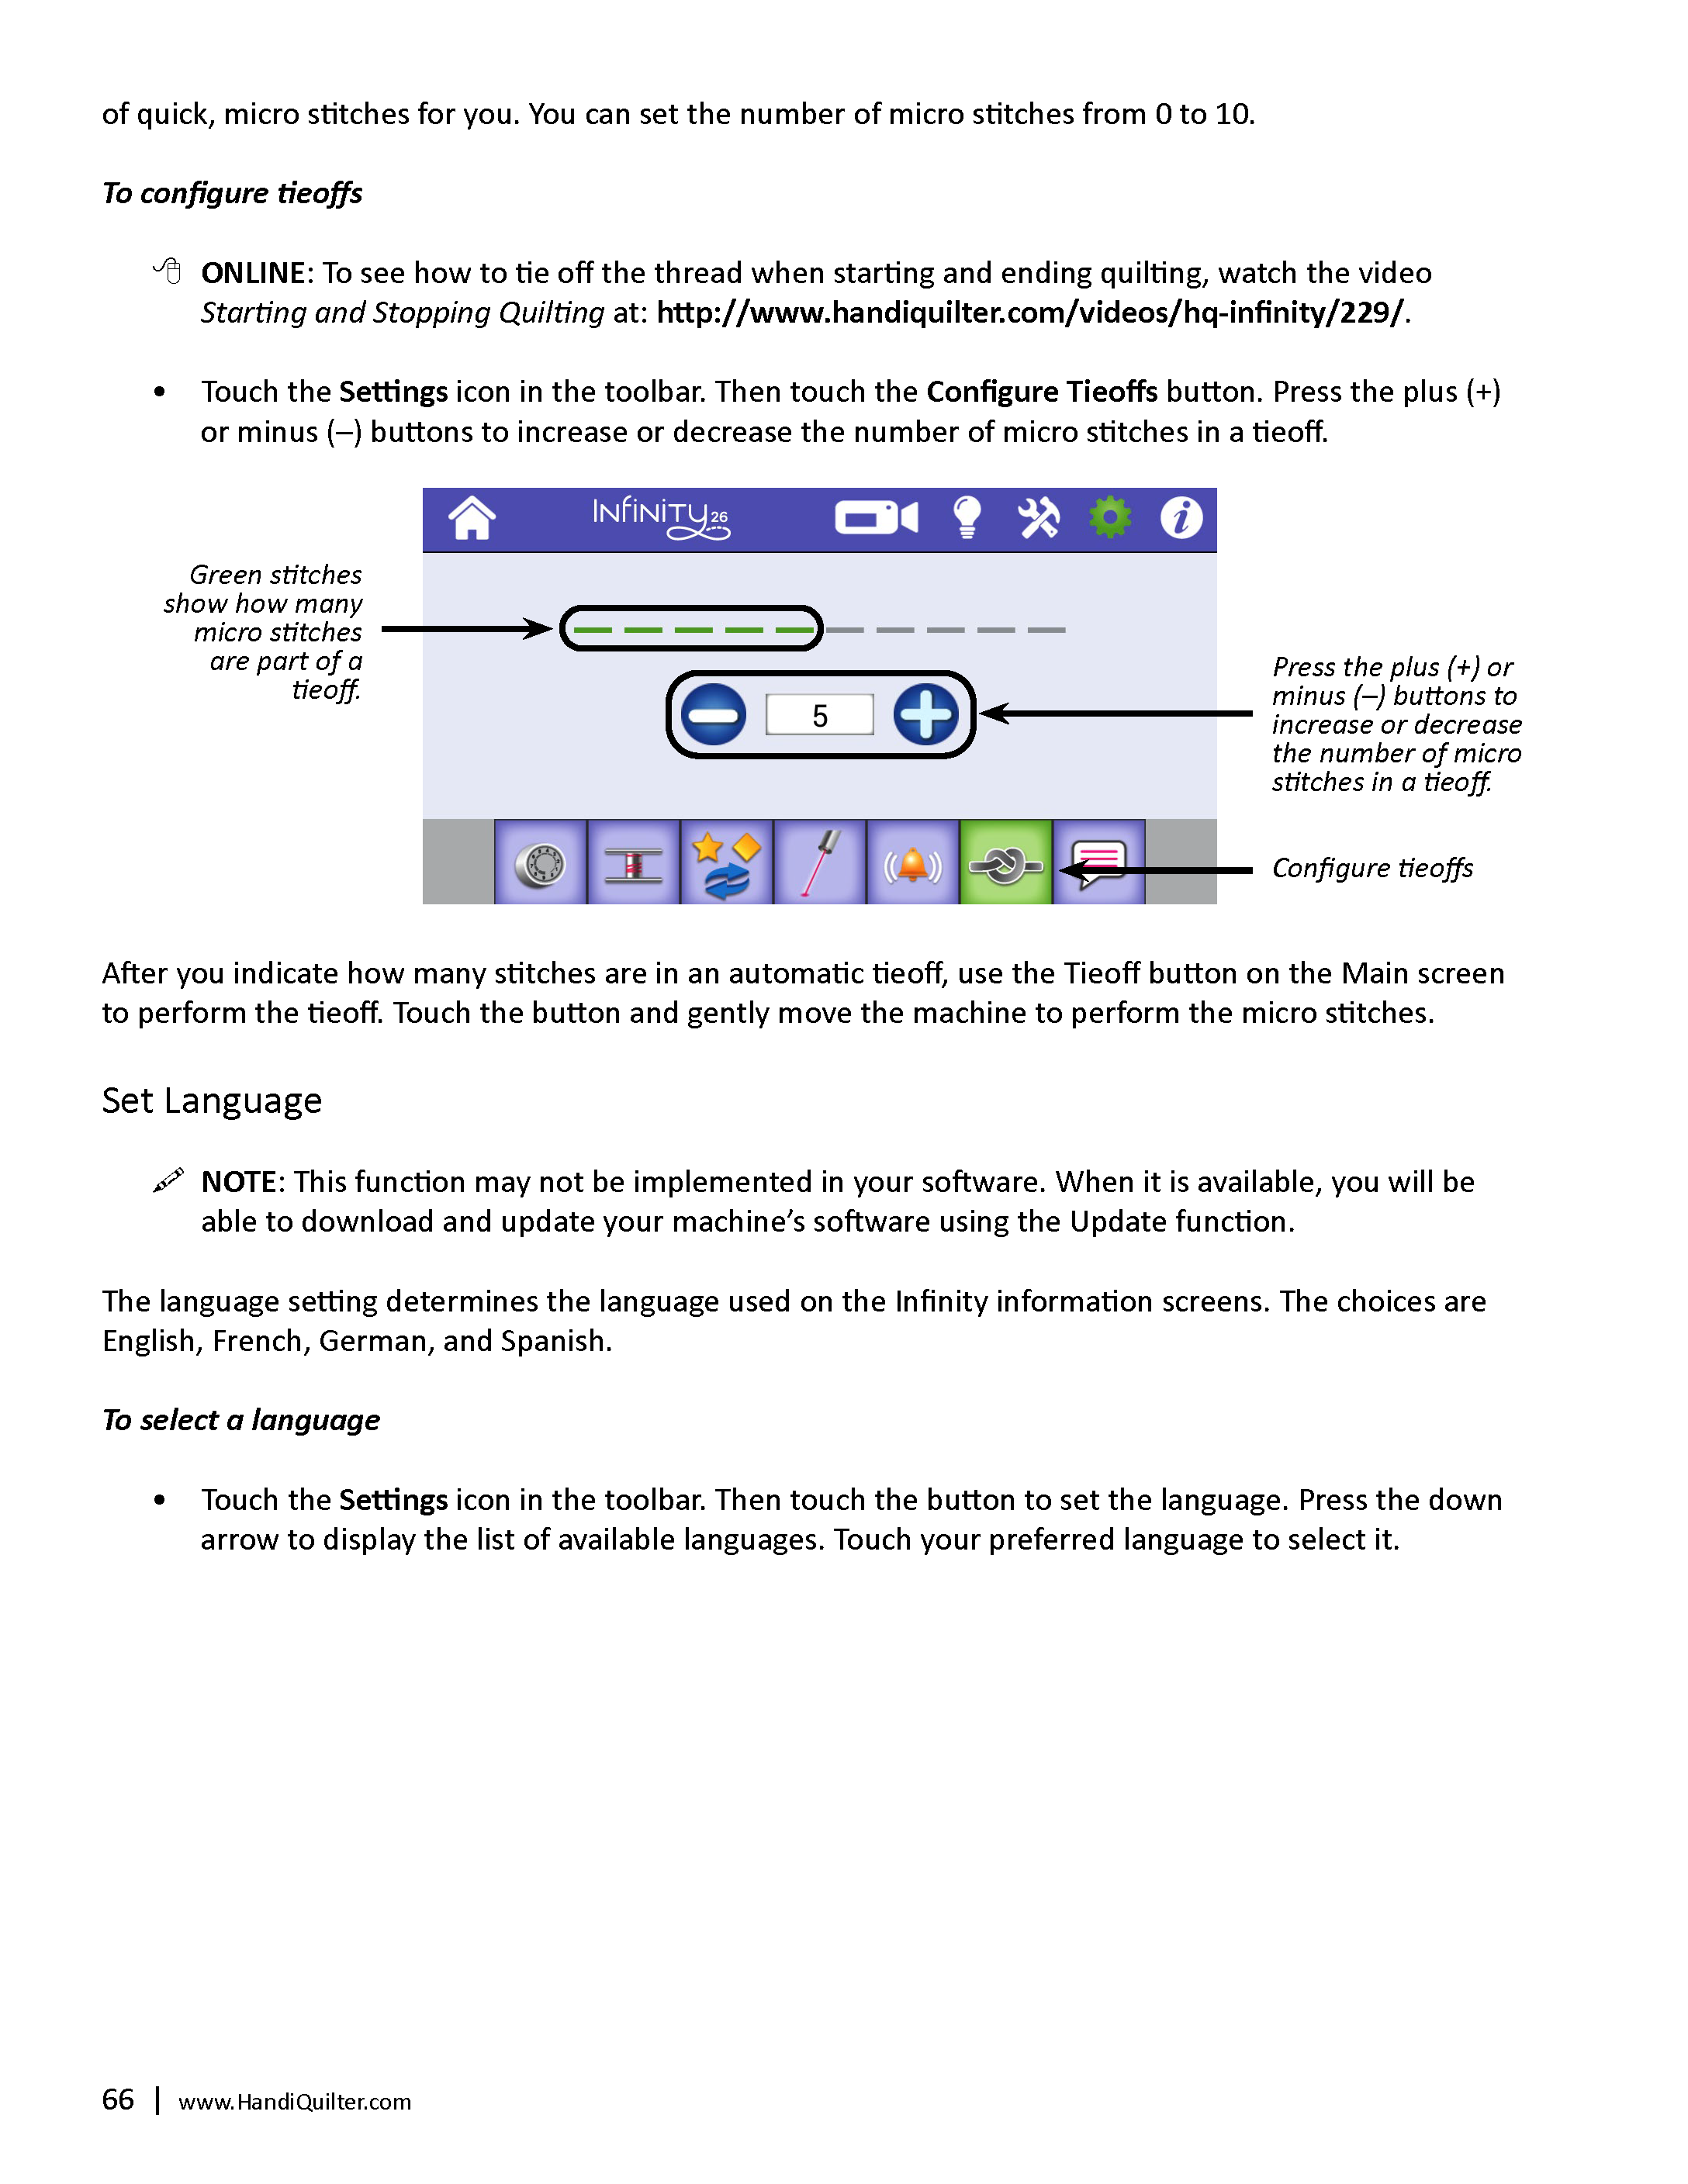 QM33001-HQ-Infinity-User-manual-version-1.4-ALL-Web-1_Page_67.png